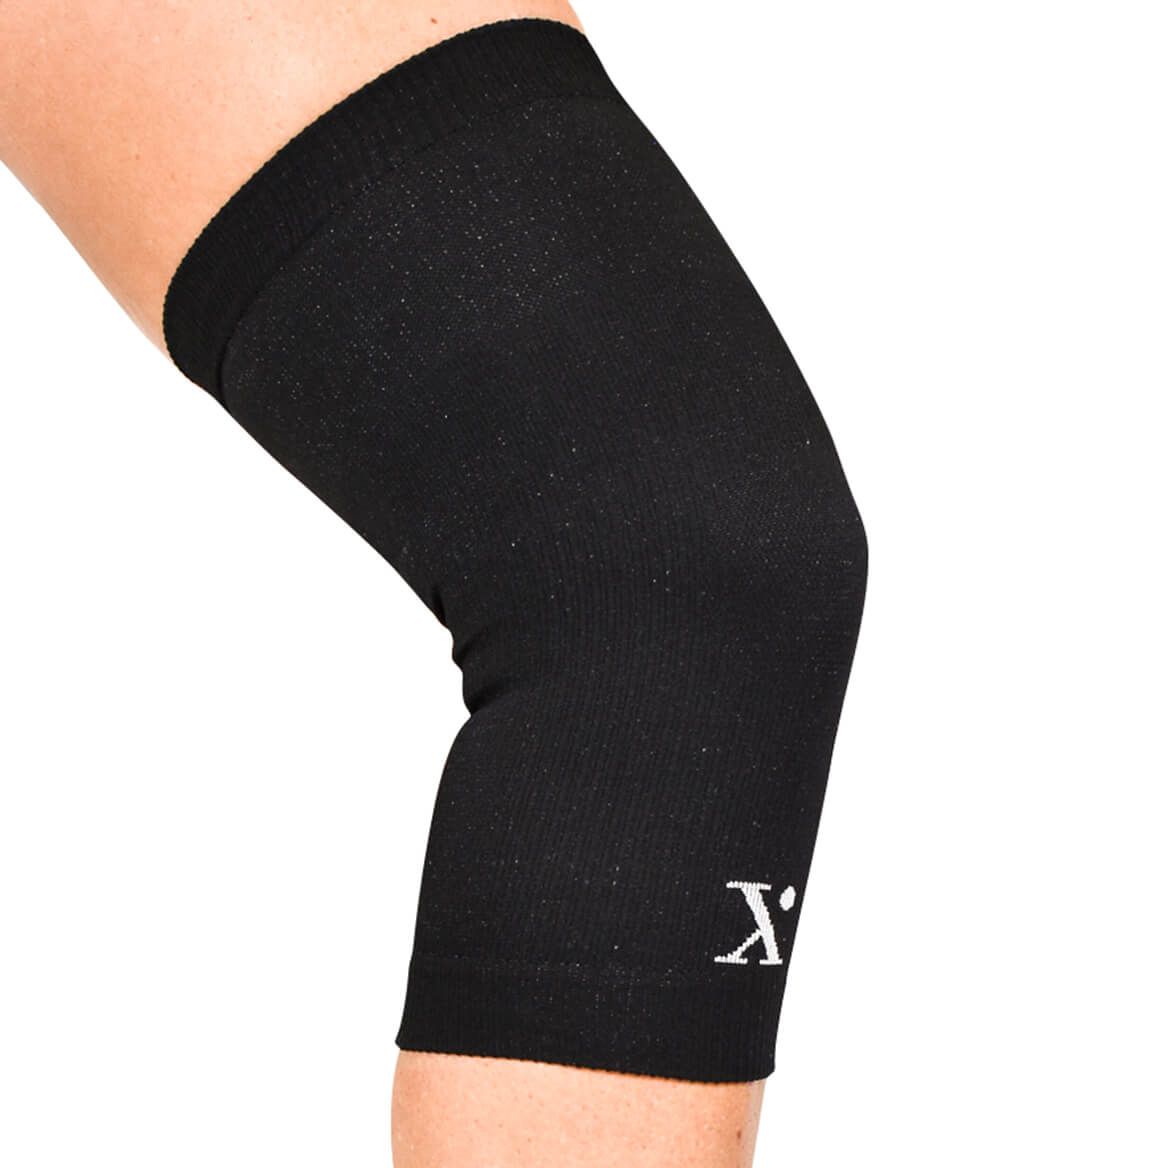 What Is the Benefit of Wearing Compression Clothing to Work Out? – Nufabrx